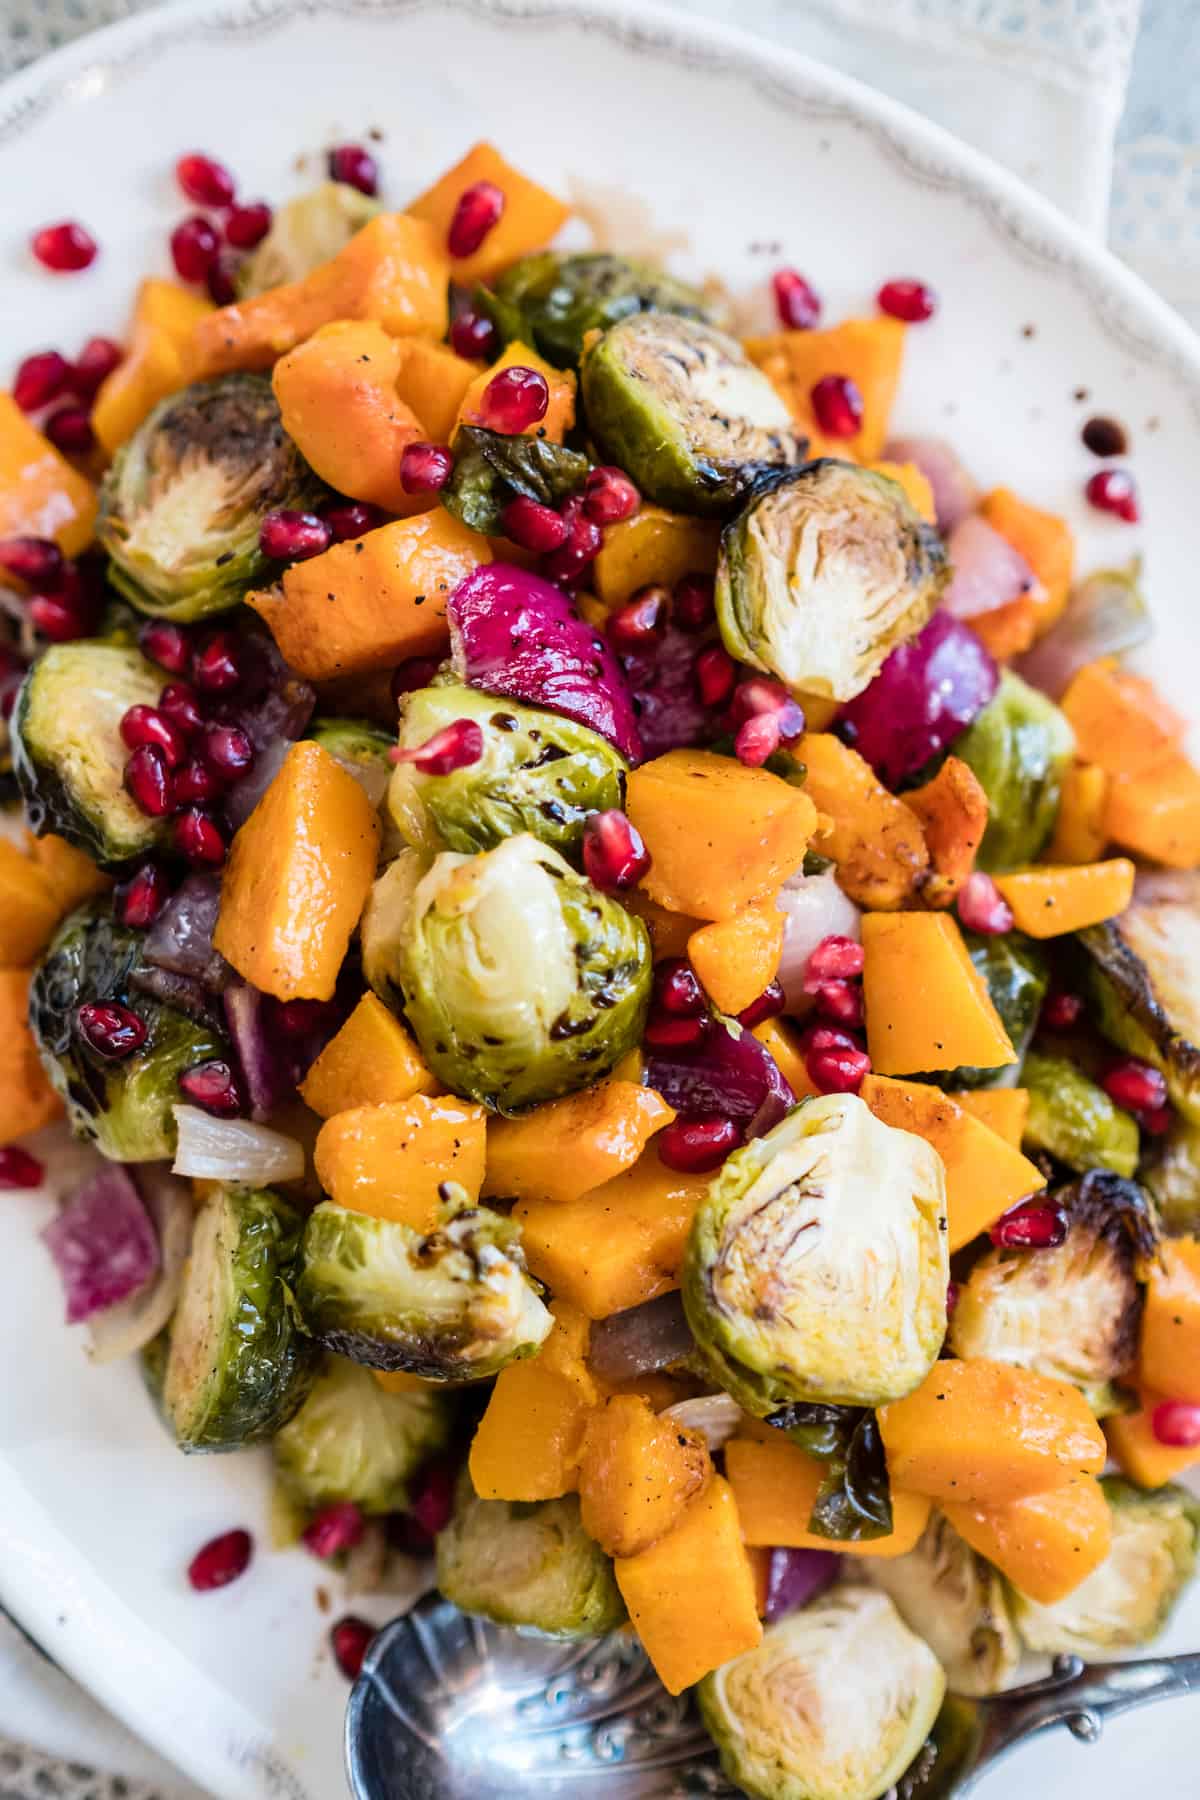 Serving platter of roasted butternut squash, burssels sprouts, red onions, and pomegranate seeds with a silver serving spoon.